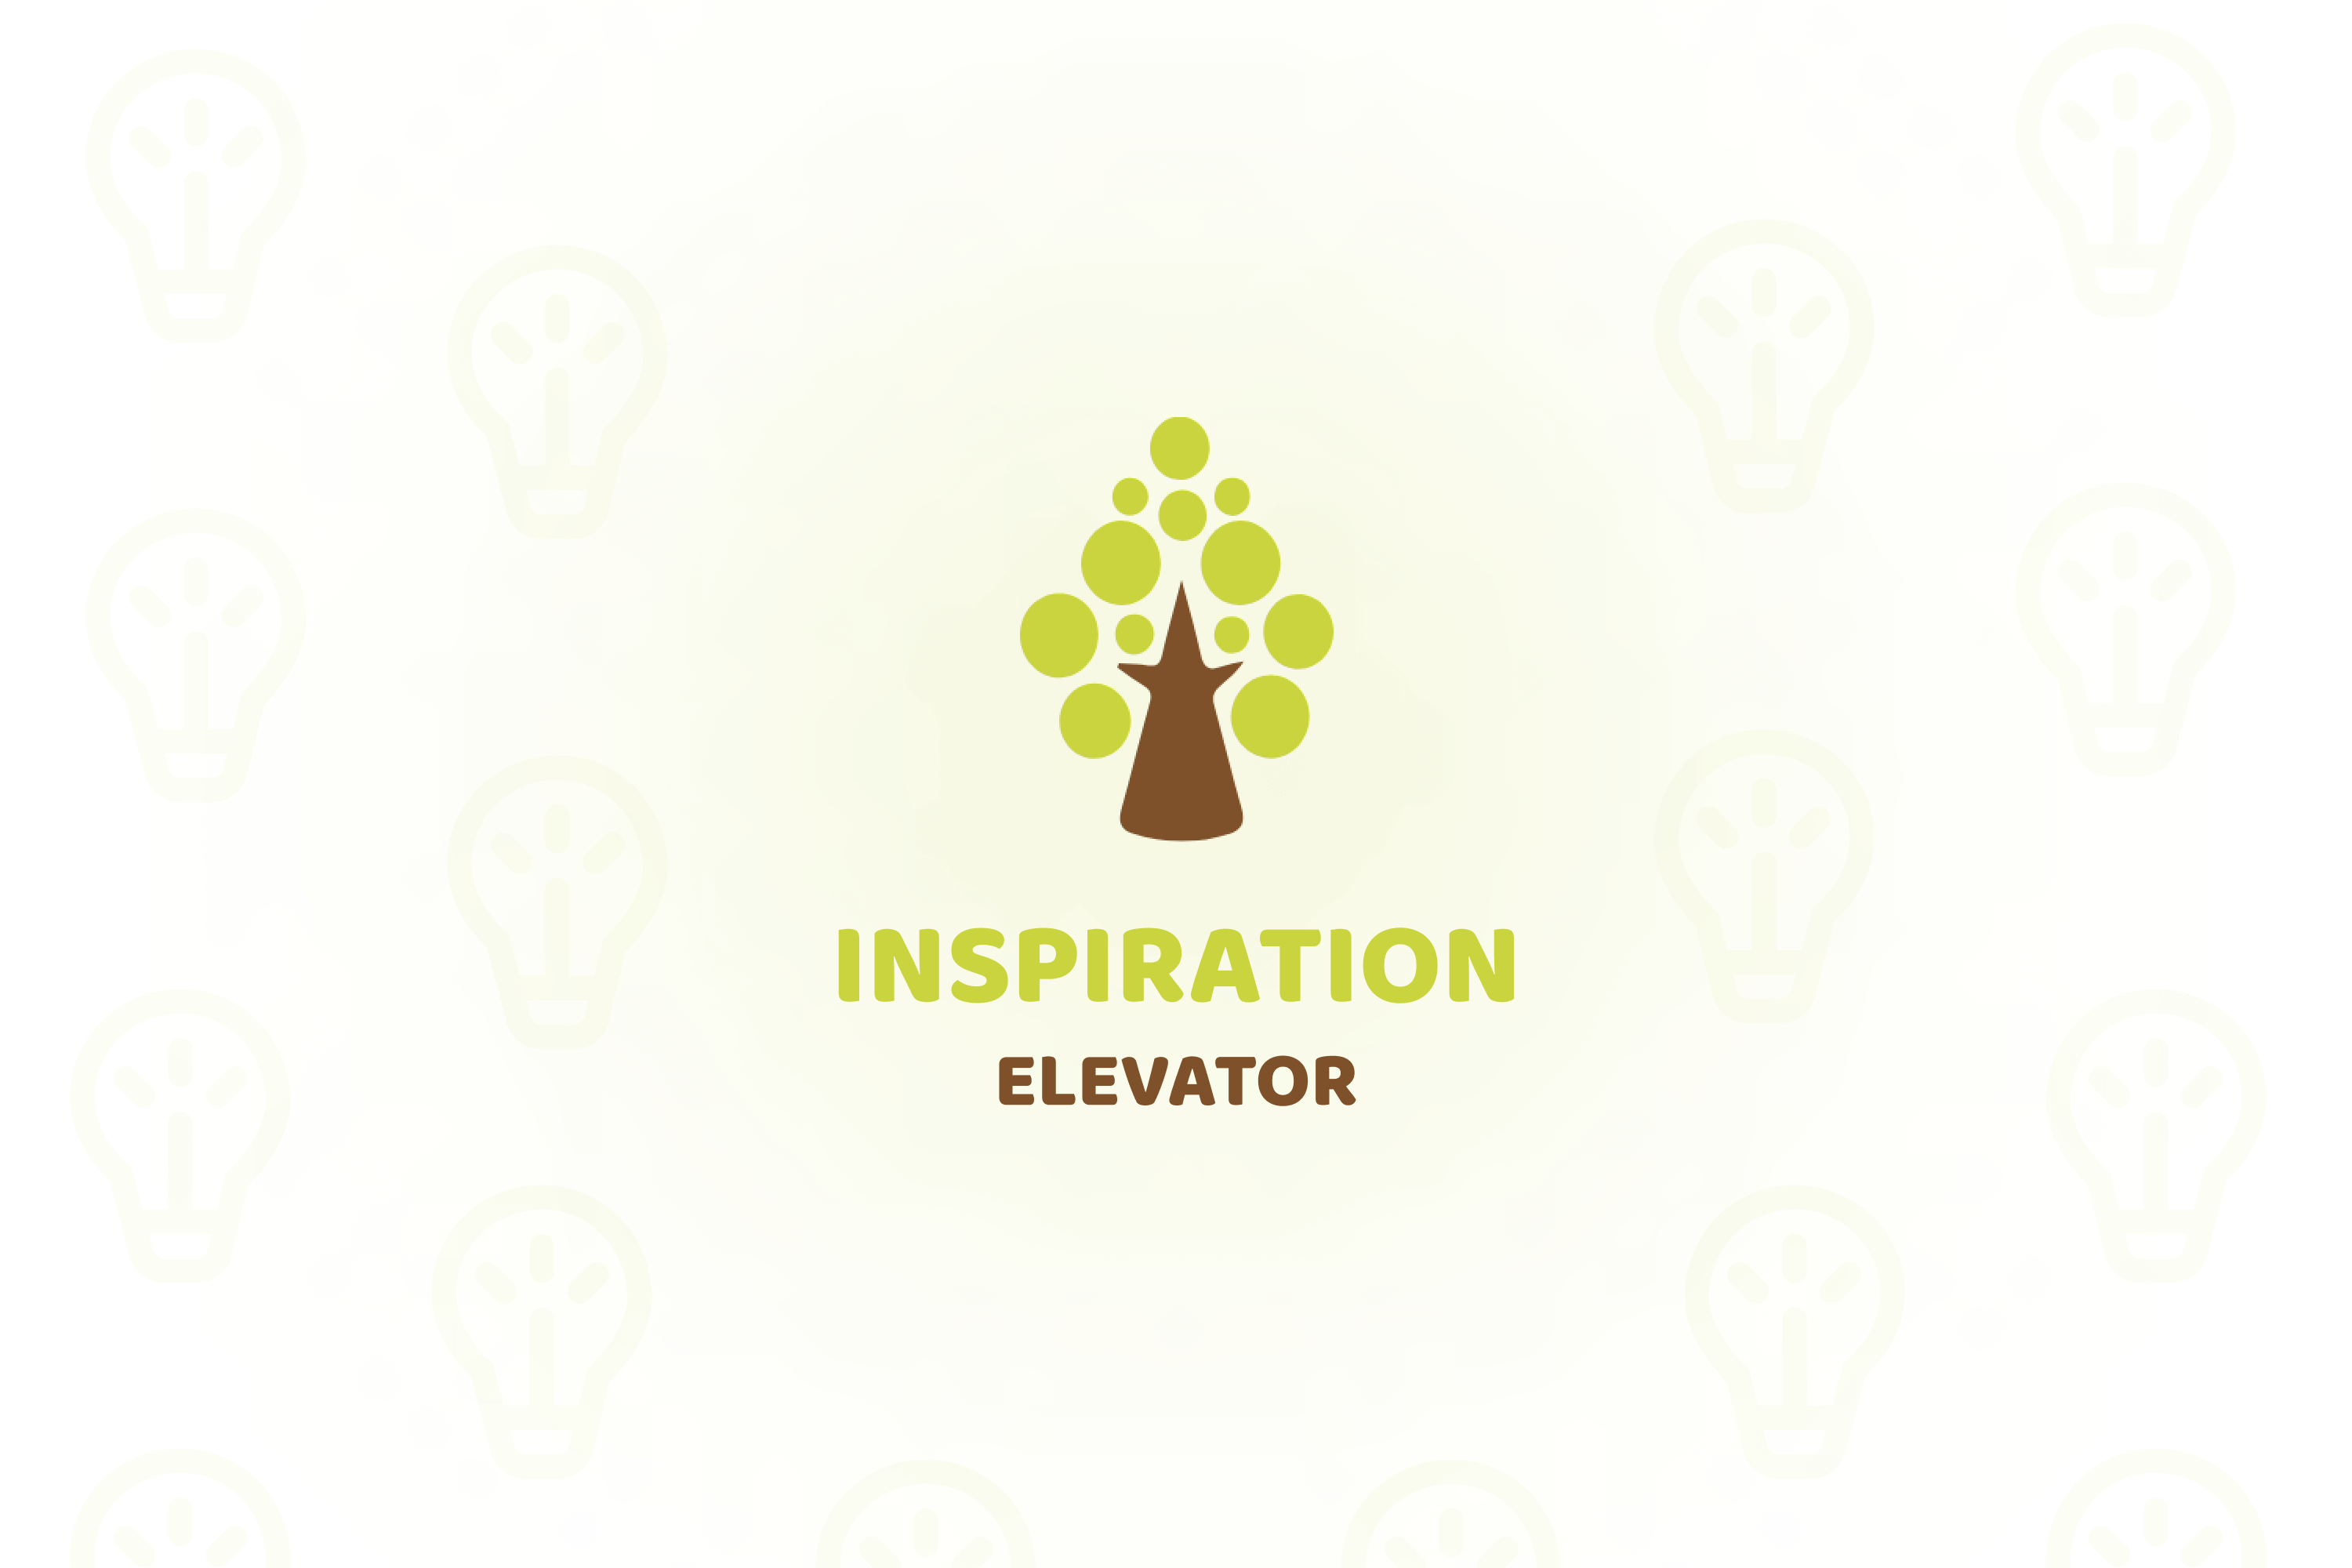 Inspiration Elevator – The Design Thinking App for Youth Workers